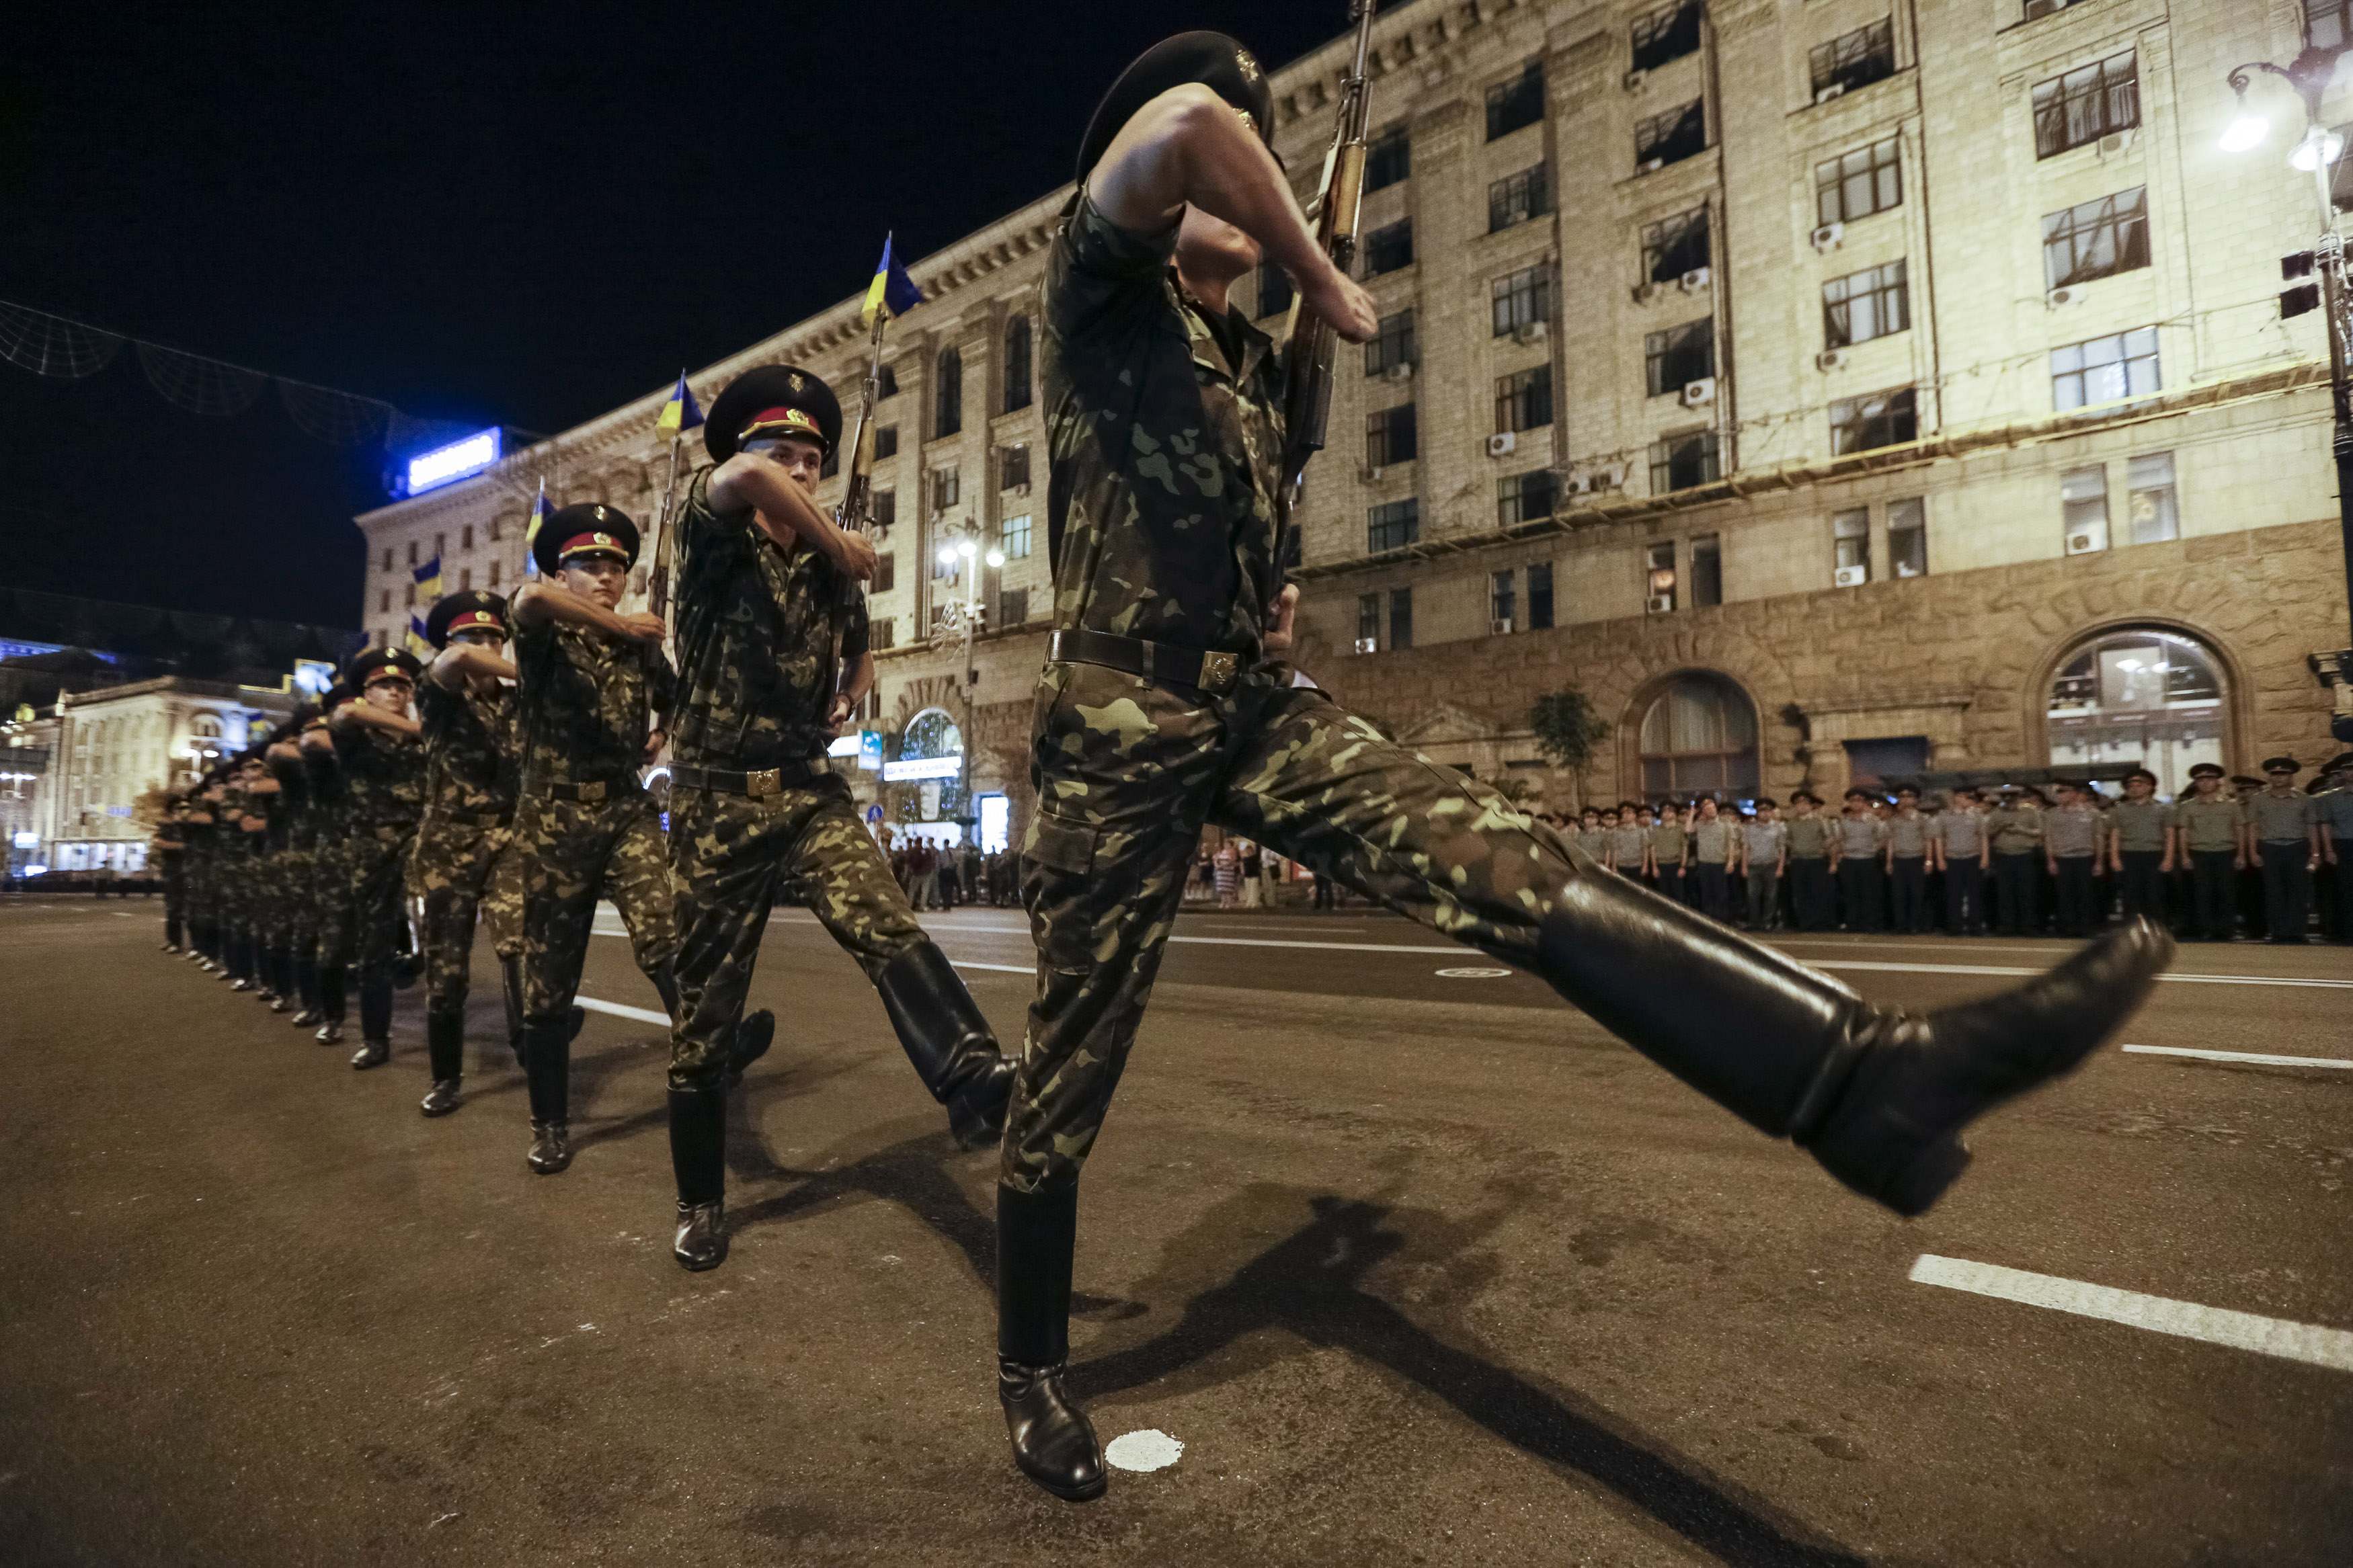 Ukrainian soldiers rehearse in Kiev on Wednesday for an Independence Day parade this weekend. NATO's commander has said the alliance would react militarily if Russian troops infiltrated a member state's territory in the way they apparently did in Crimea. | REUTERS